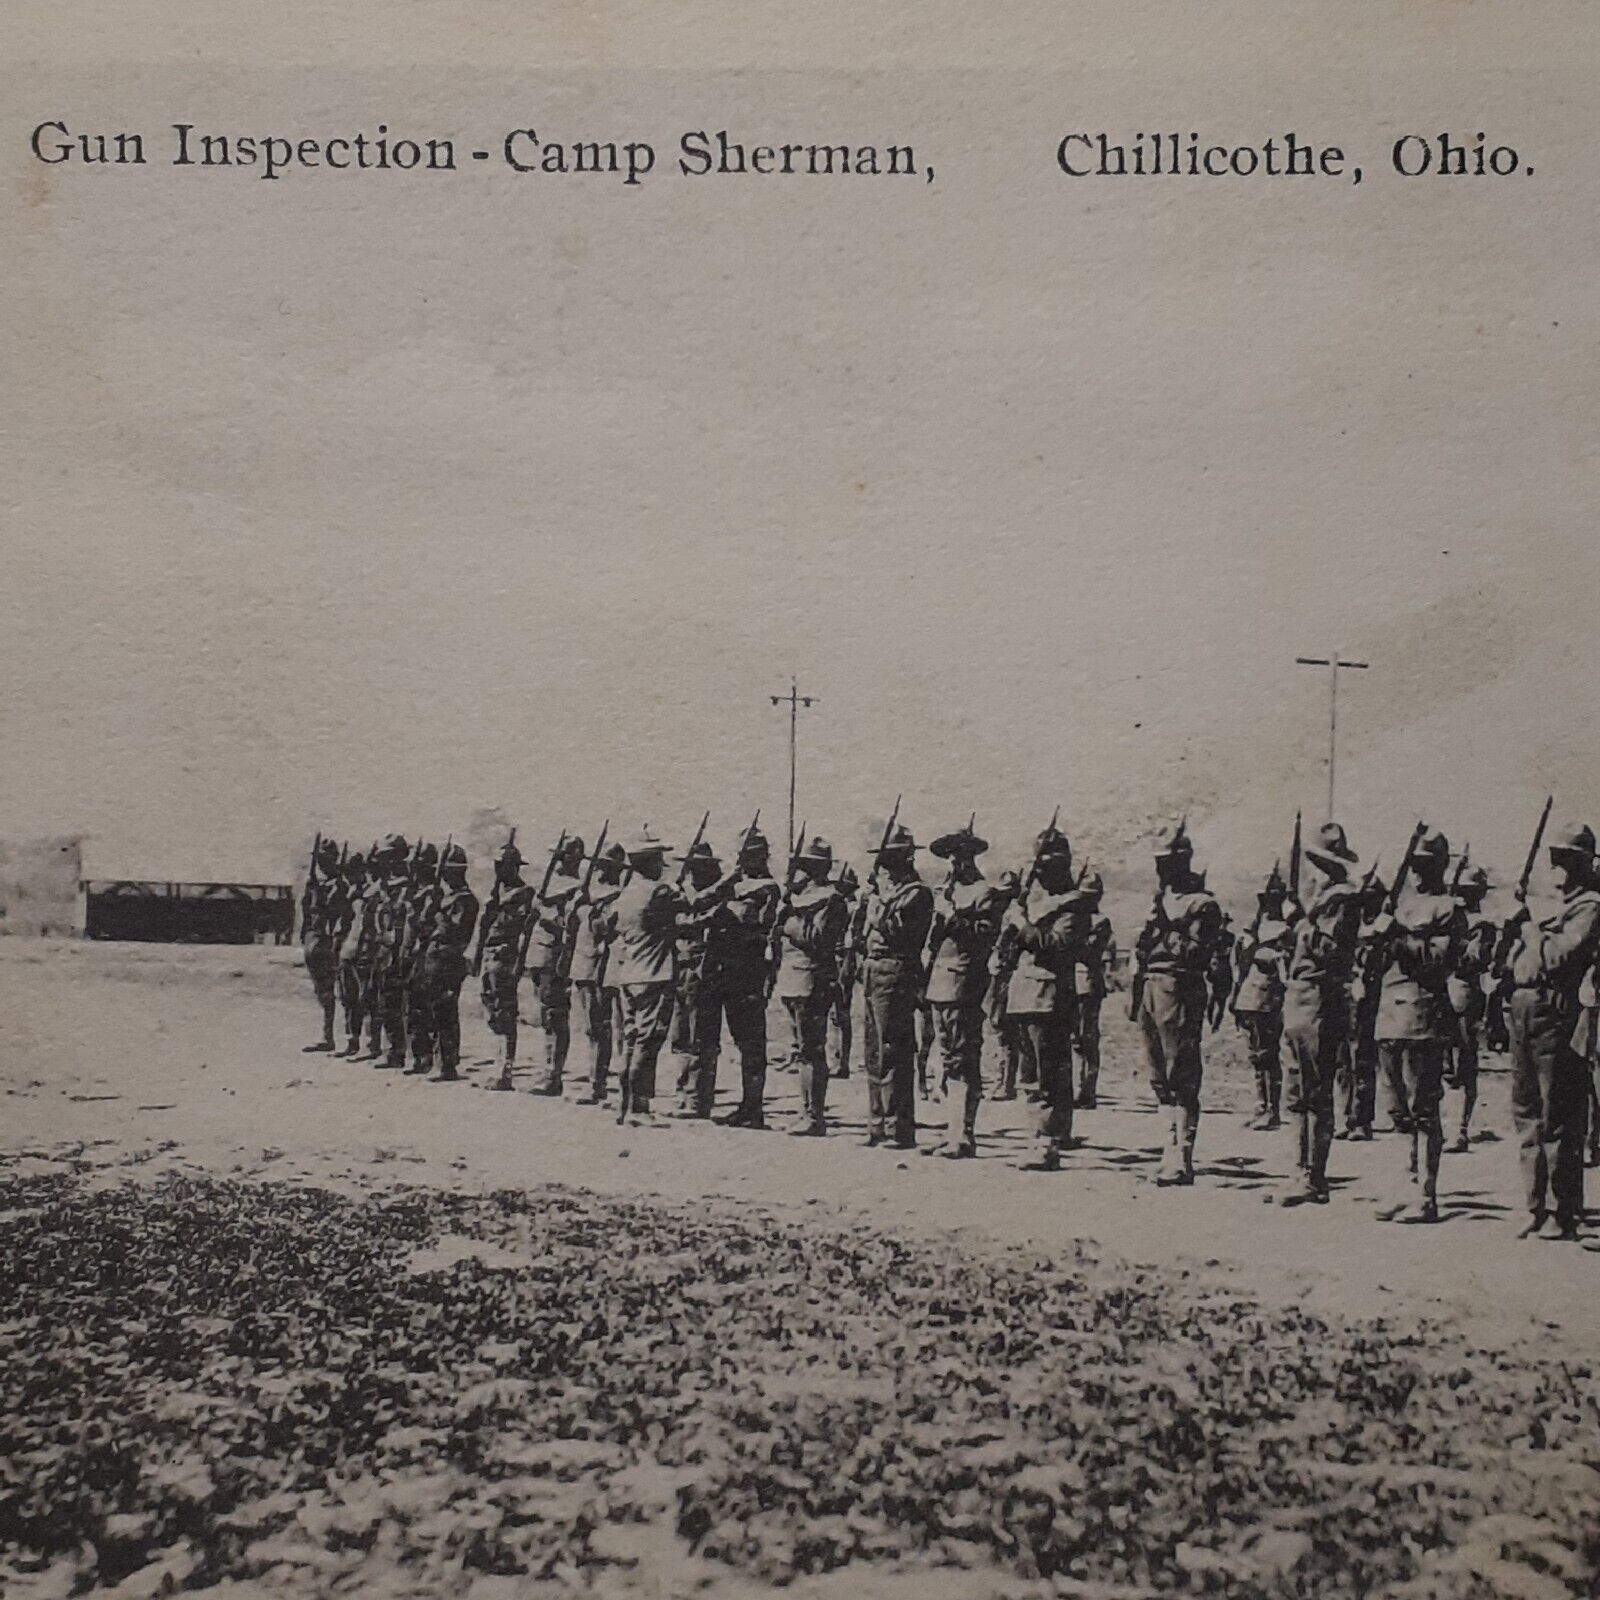 Historic WWI Postcard Camp Sherman Gun Inspection Chillicothe Ohio May 19, 1918 